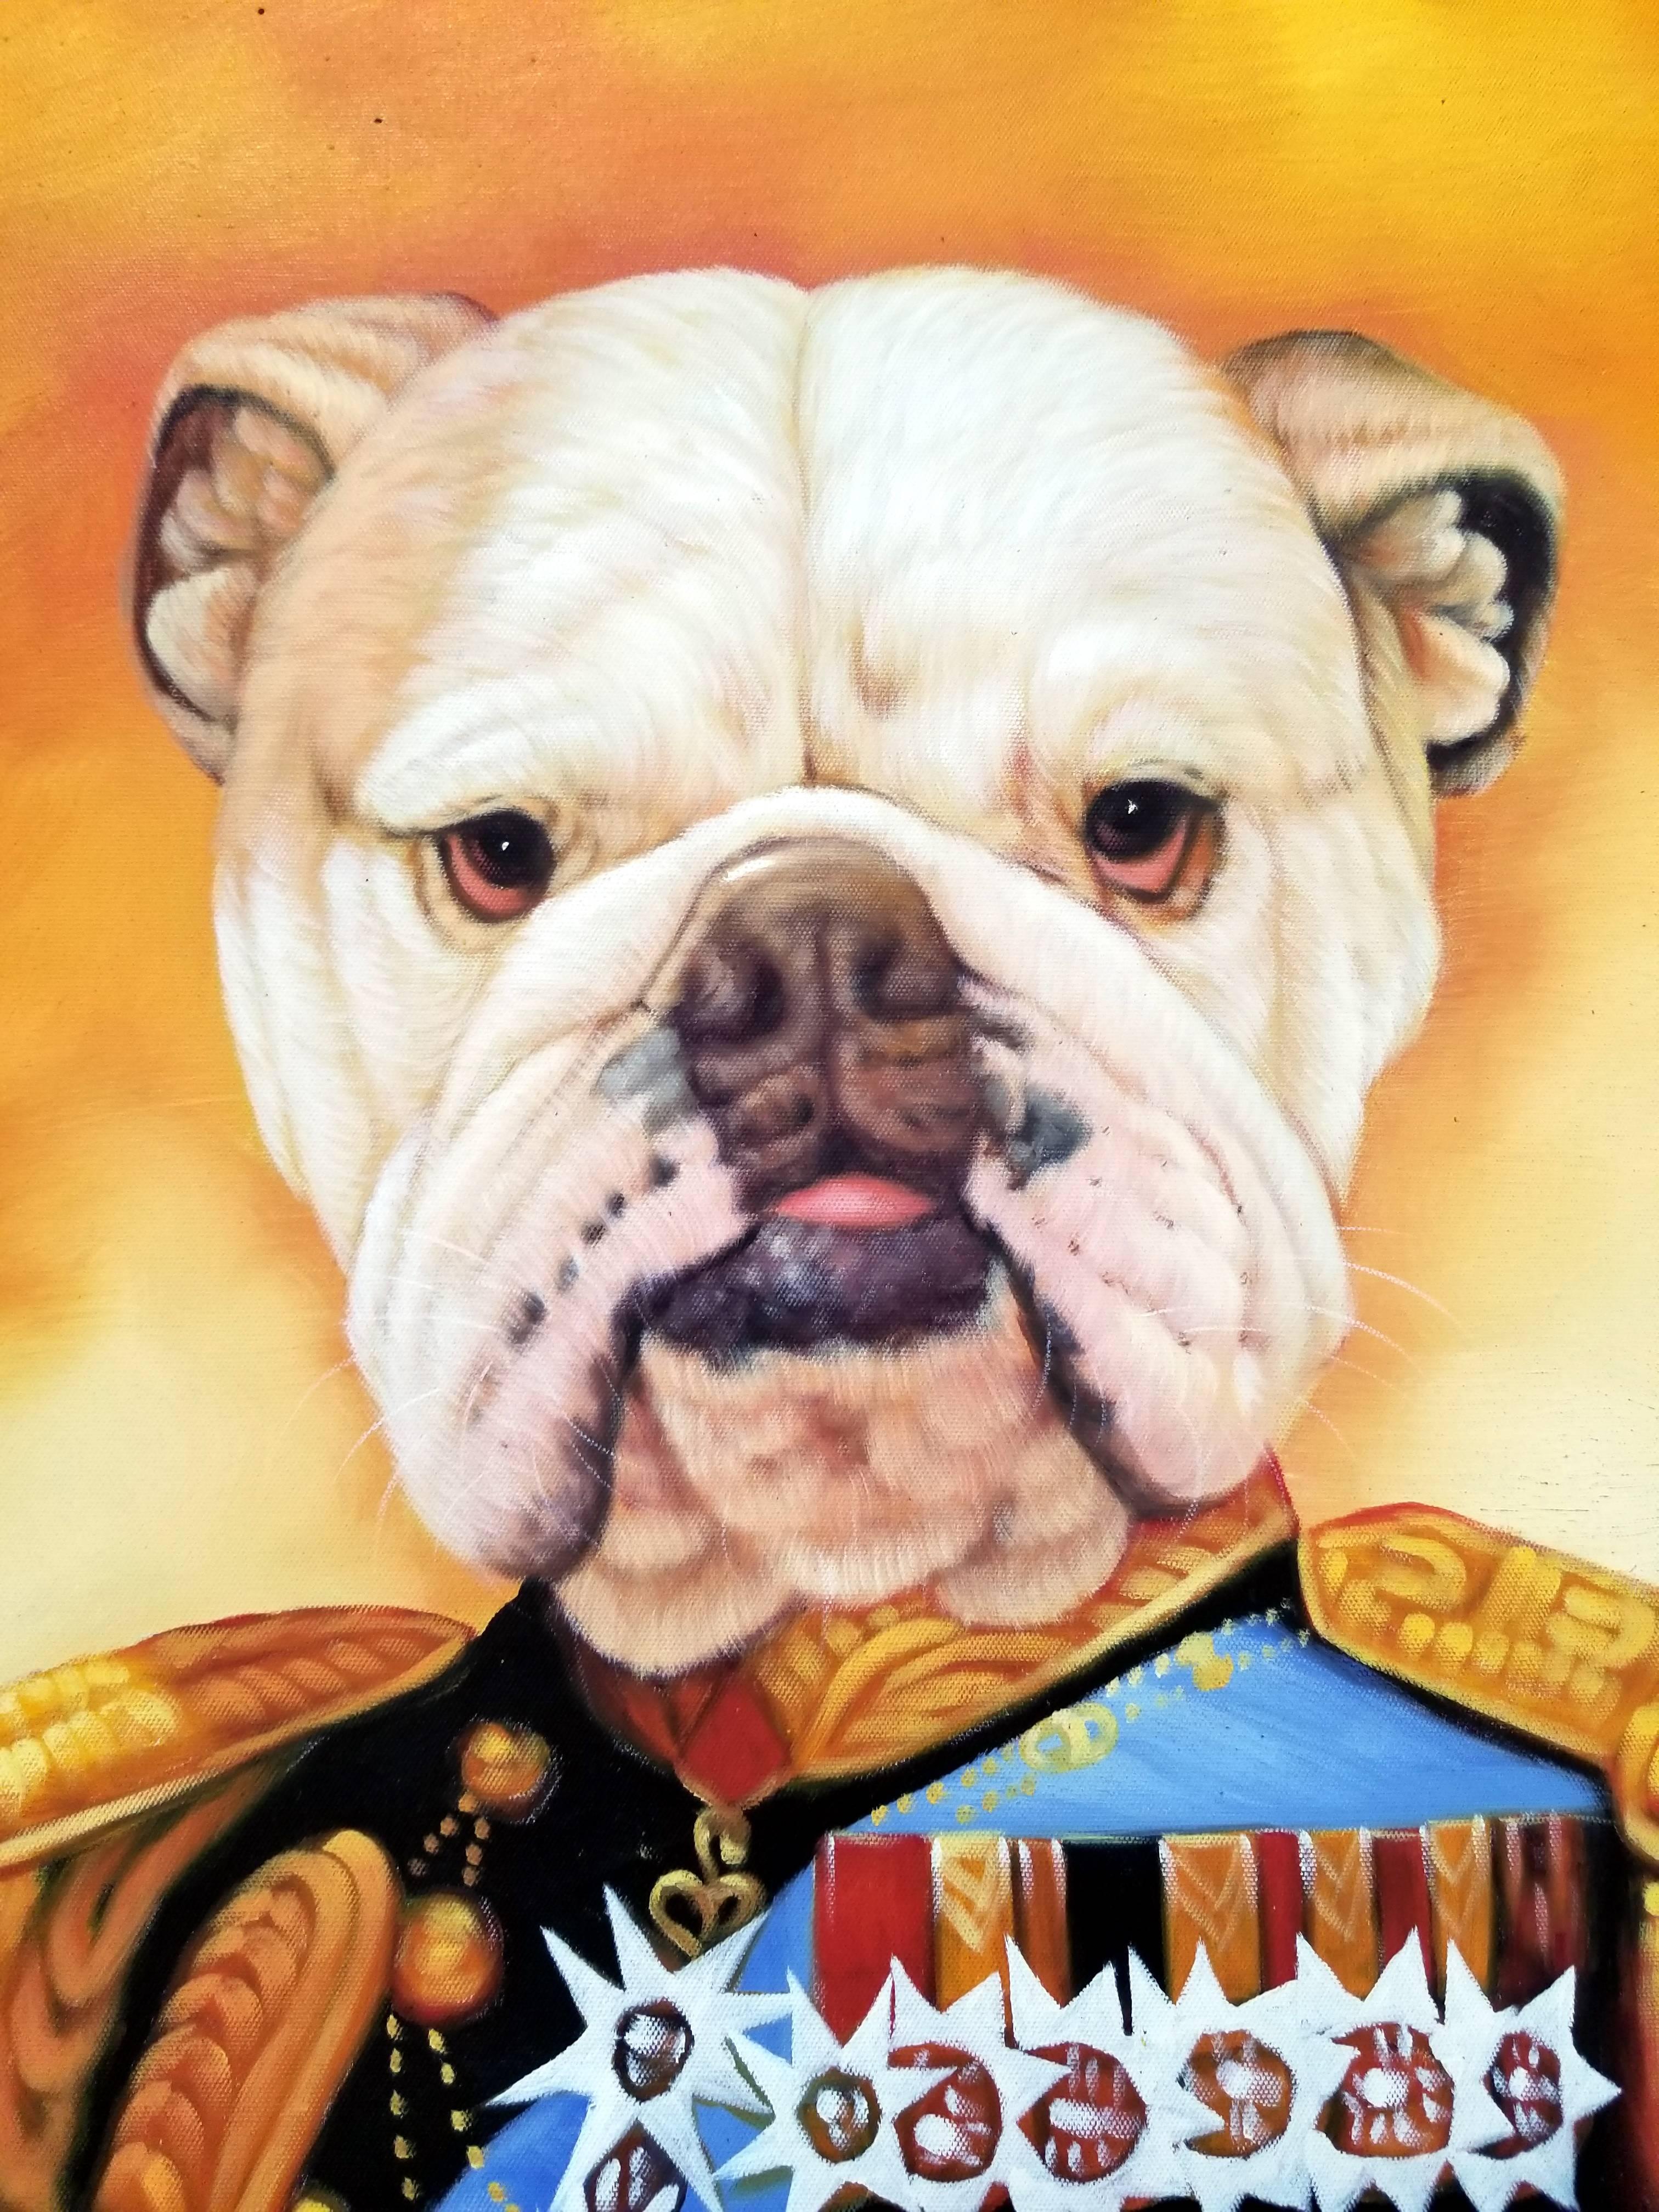 Prince Winston of Bull lV - Painting by Y.m.Lo